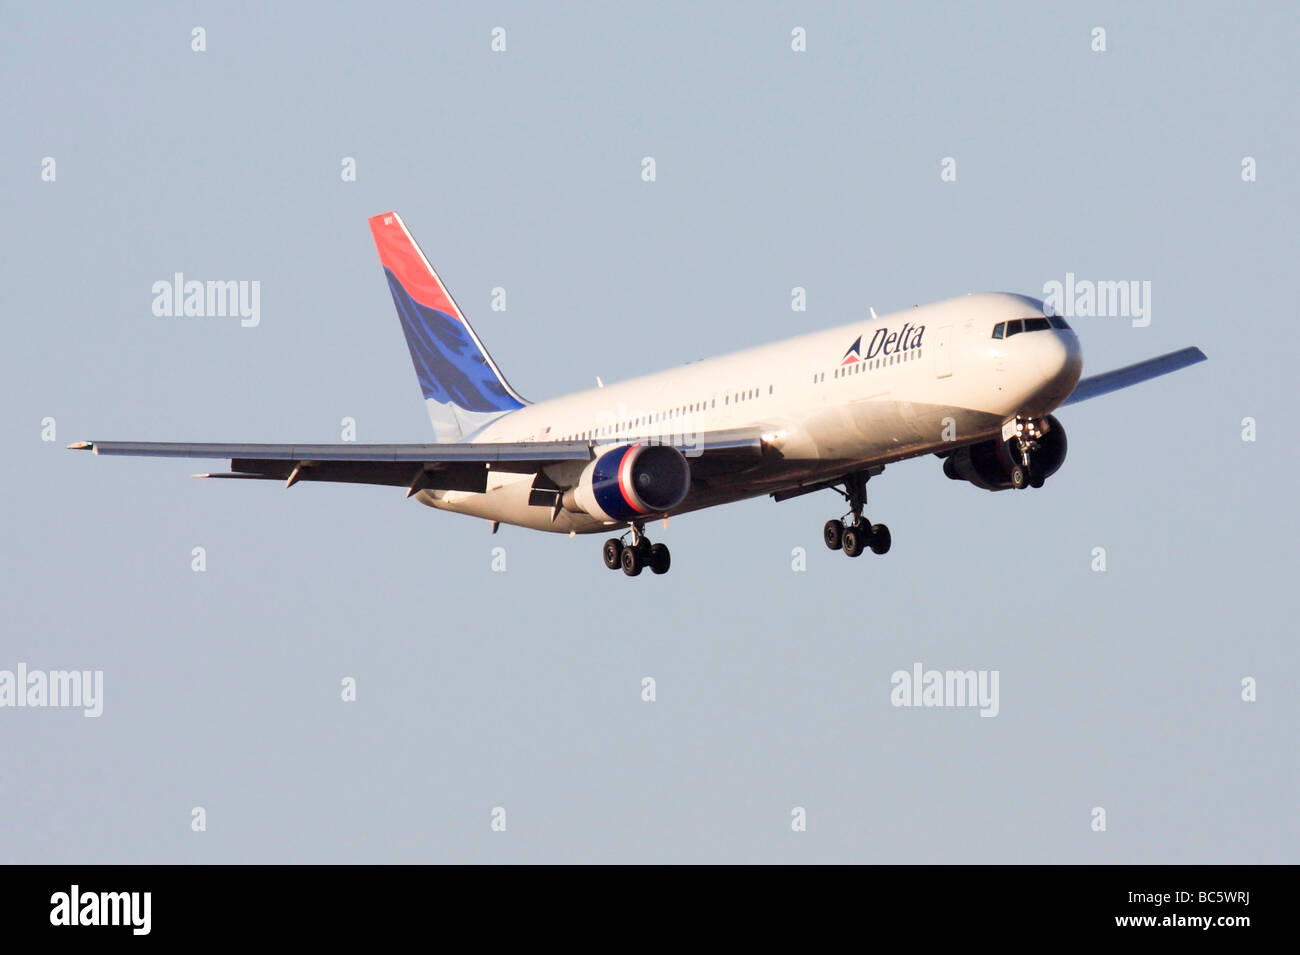 Delta Airlines commercial flight Stock Photo